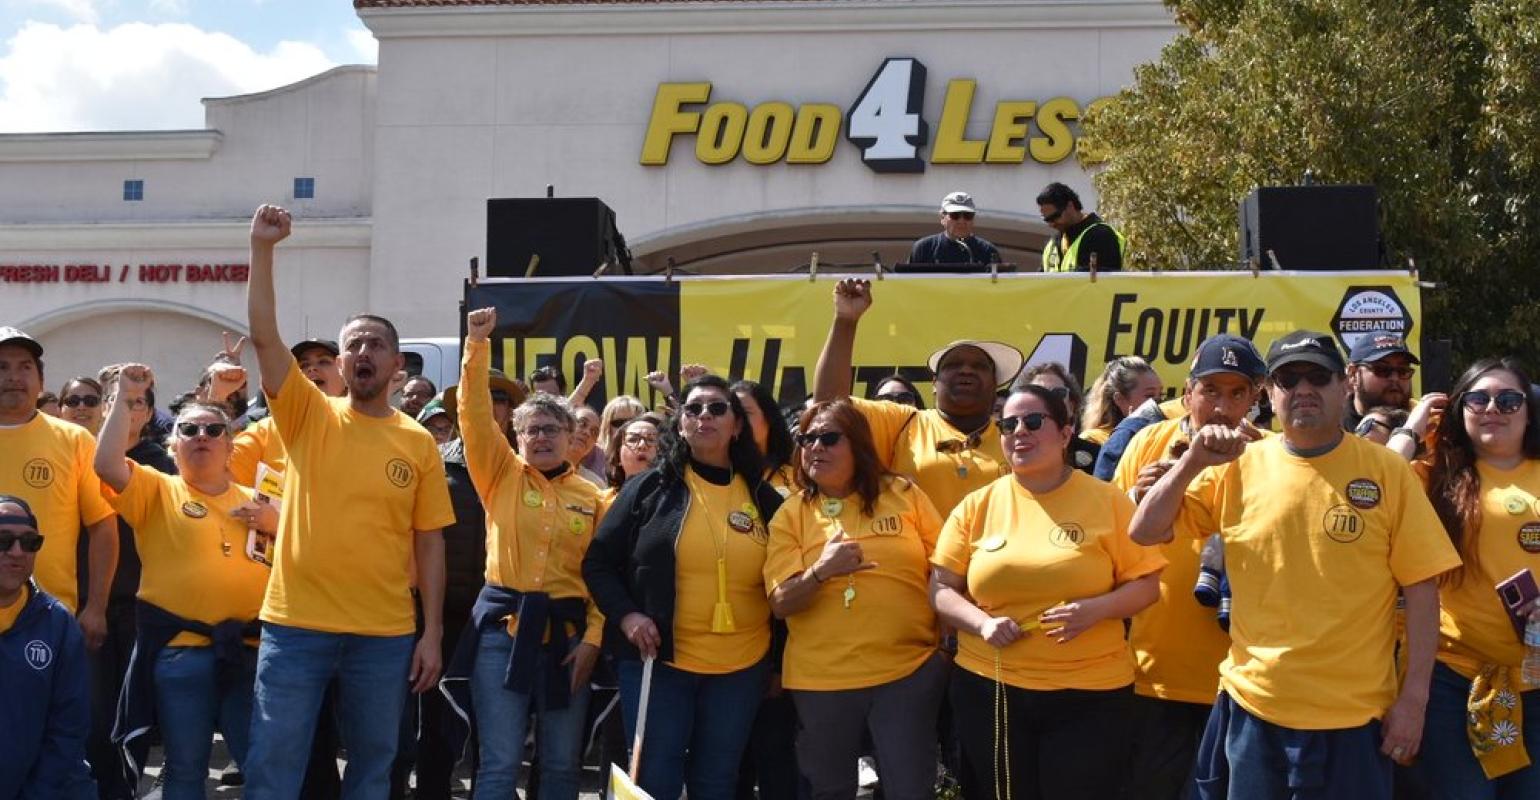 Strike threat from over 6,000 food workers appears to be over